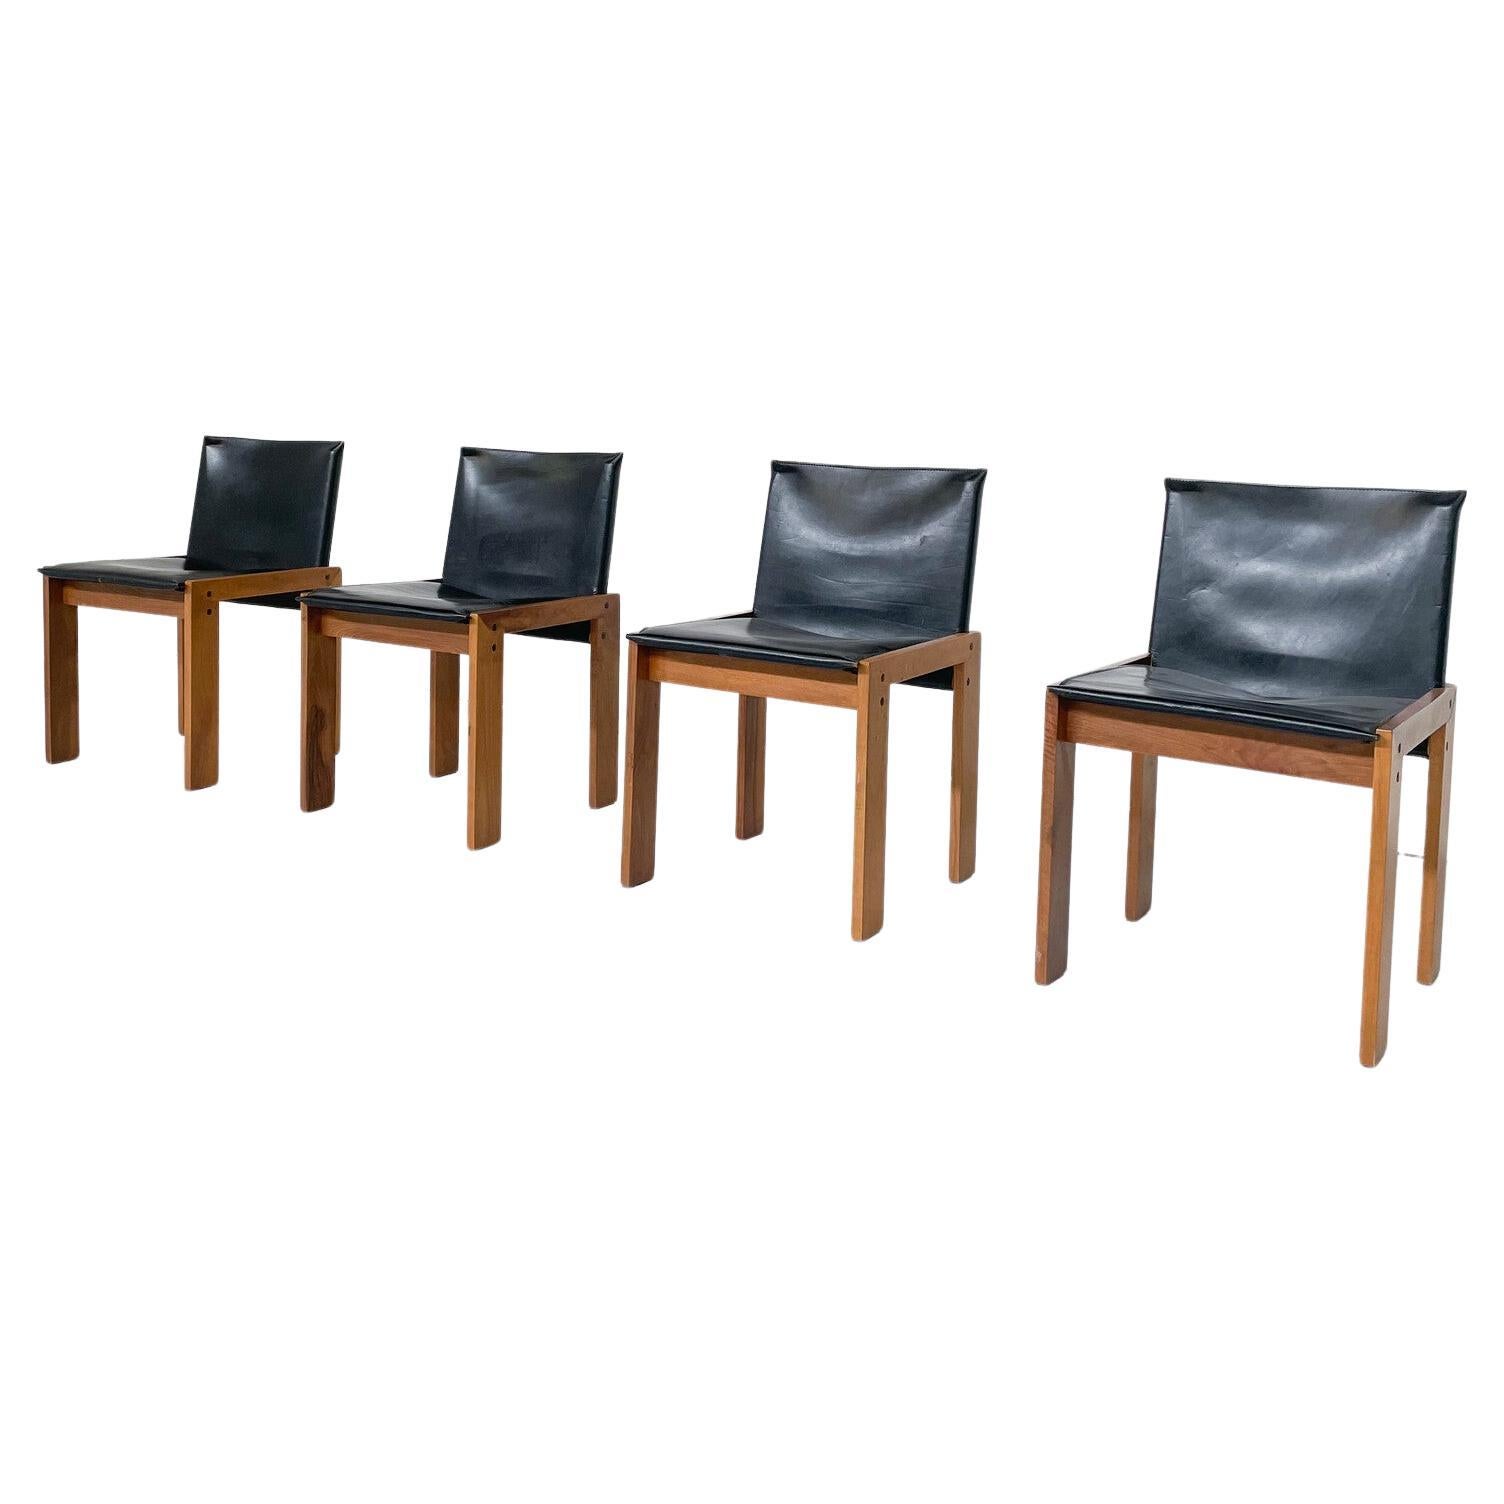 Mid-Century Modern Set of 4 Chairs in the Style of Scarpa, Wood and Leather  For Sale